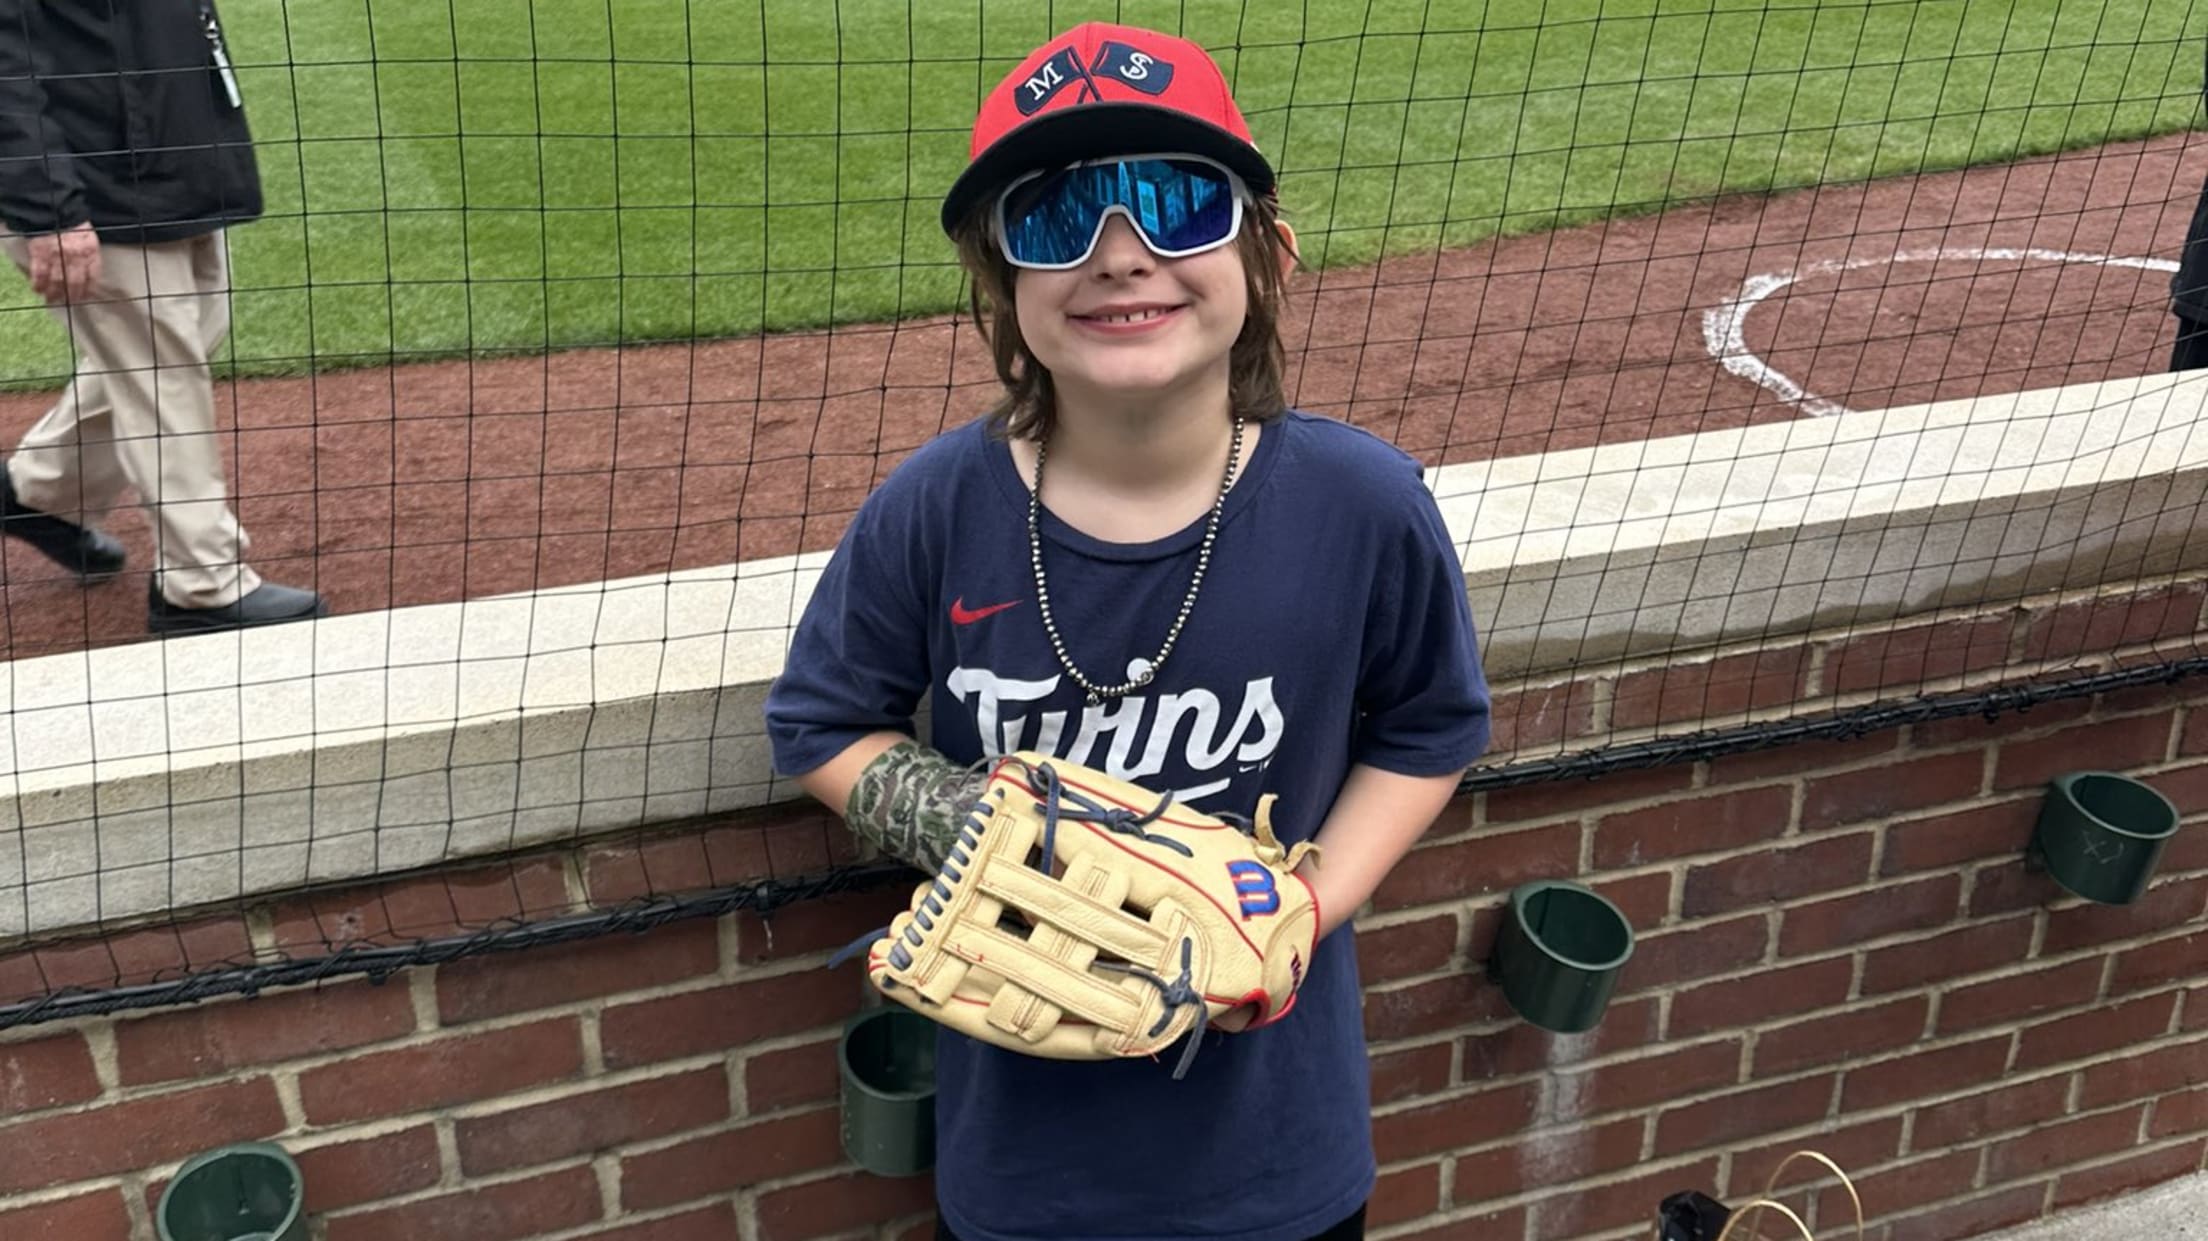 8-year-old Camden Cleveland is all smiles after Byron Buxton made his day